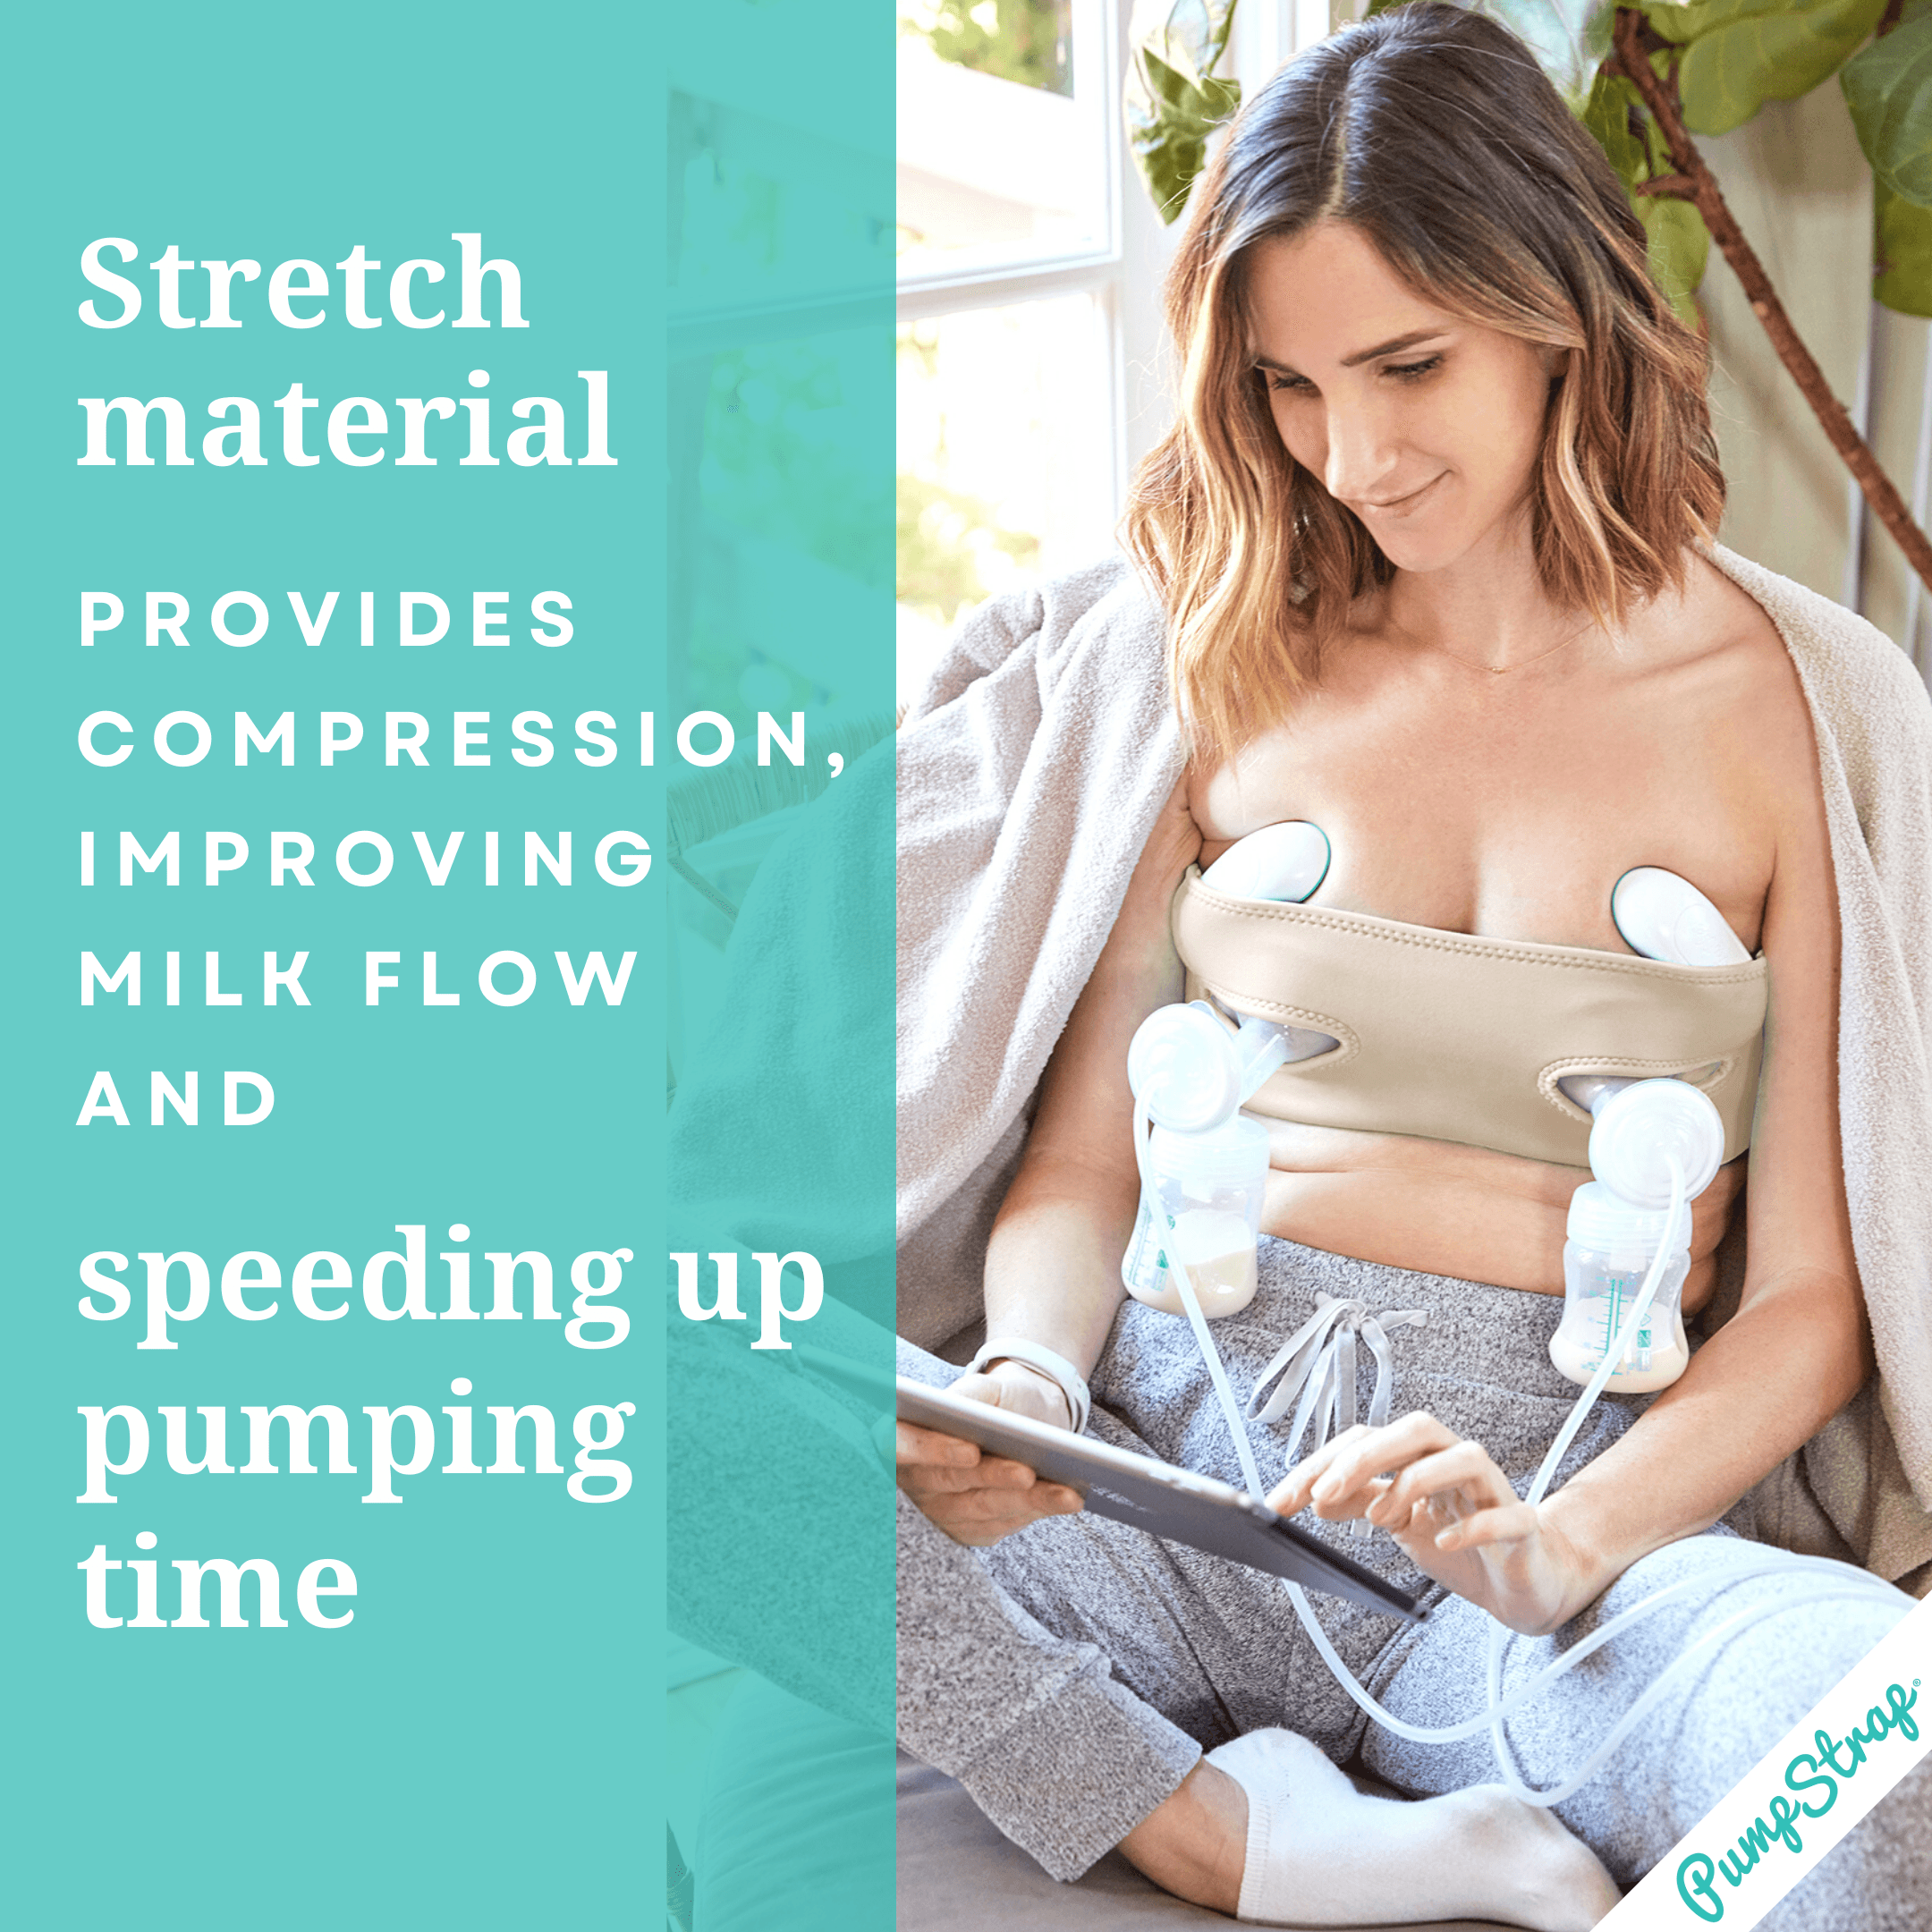 3-Step DIY Hands Free Pumping Bra For Less Than 5$! - All Natural Mothering